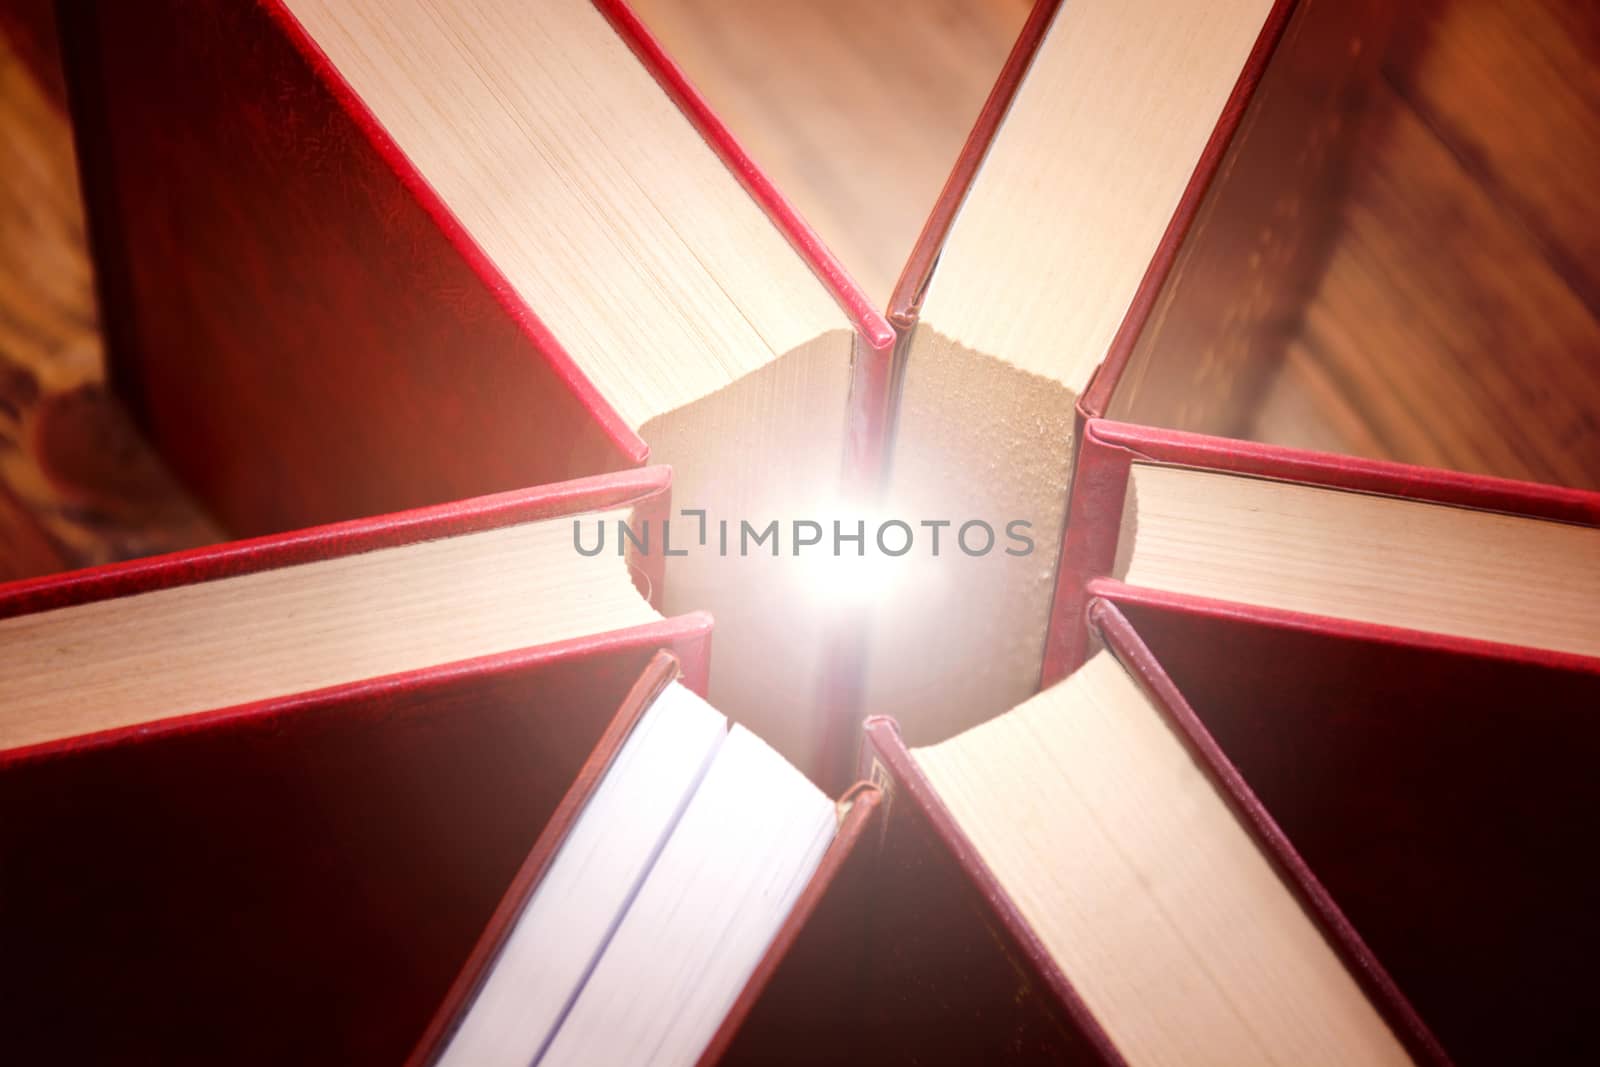 Power of wisdom. Books. Knowledge and education conceptual image.